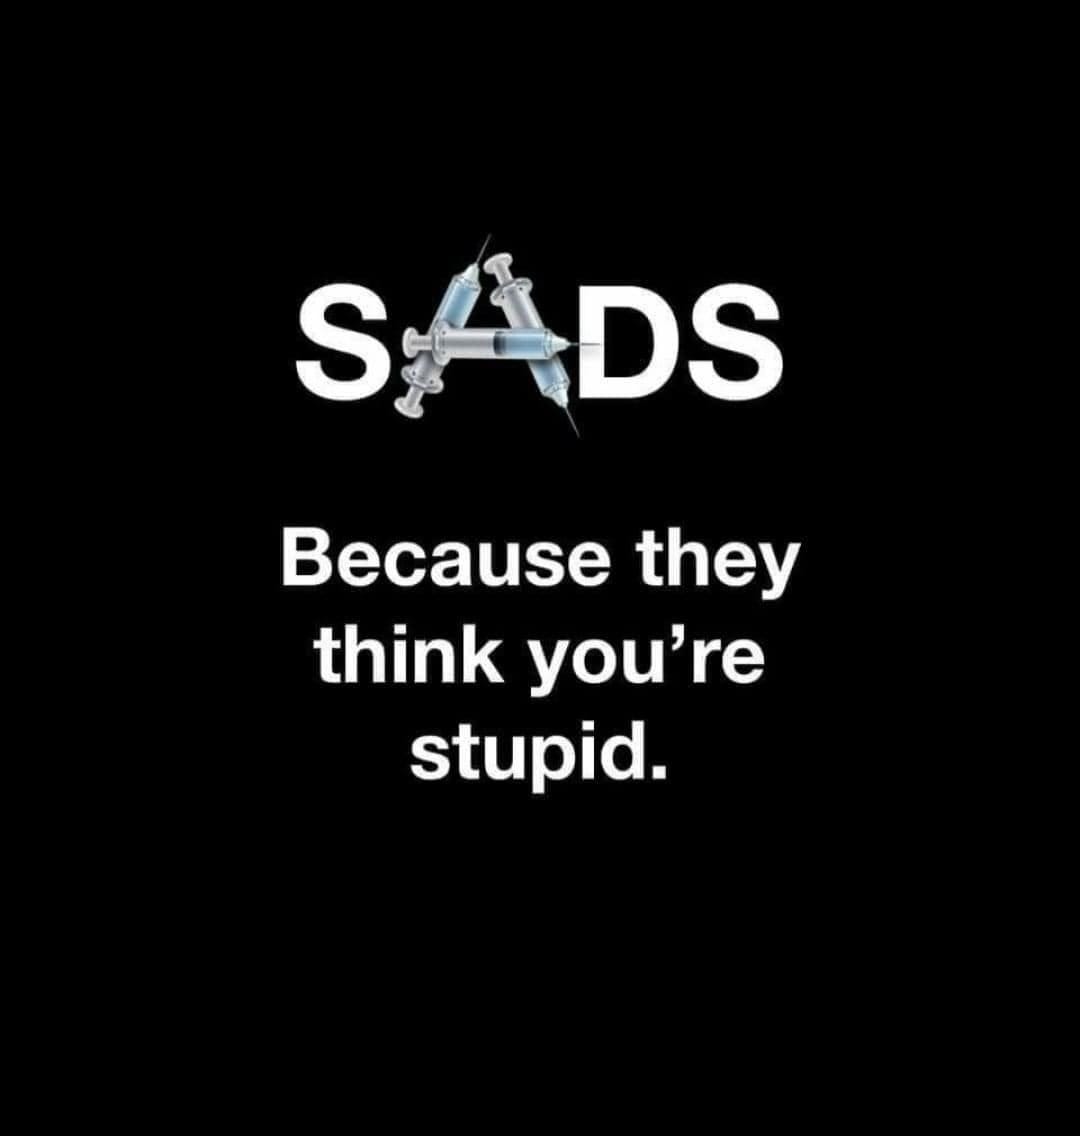 May be an image of text that says "SADS S DS Because they think you're stupid."